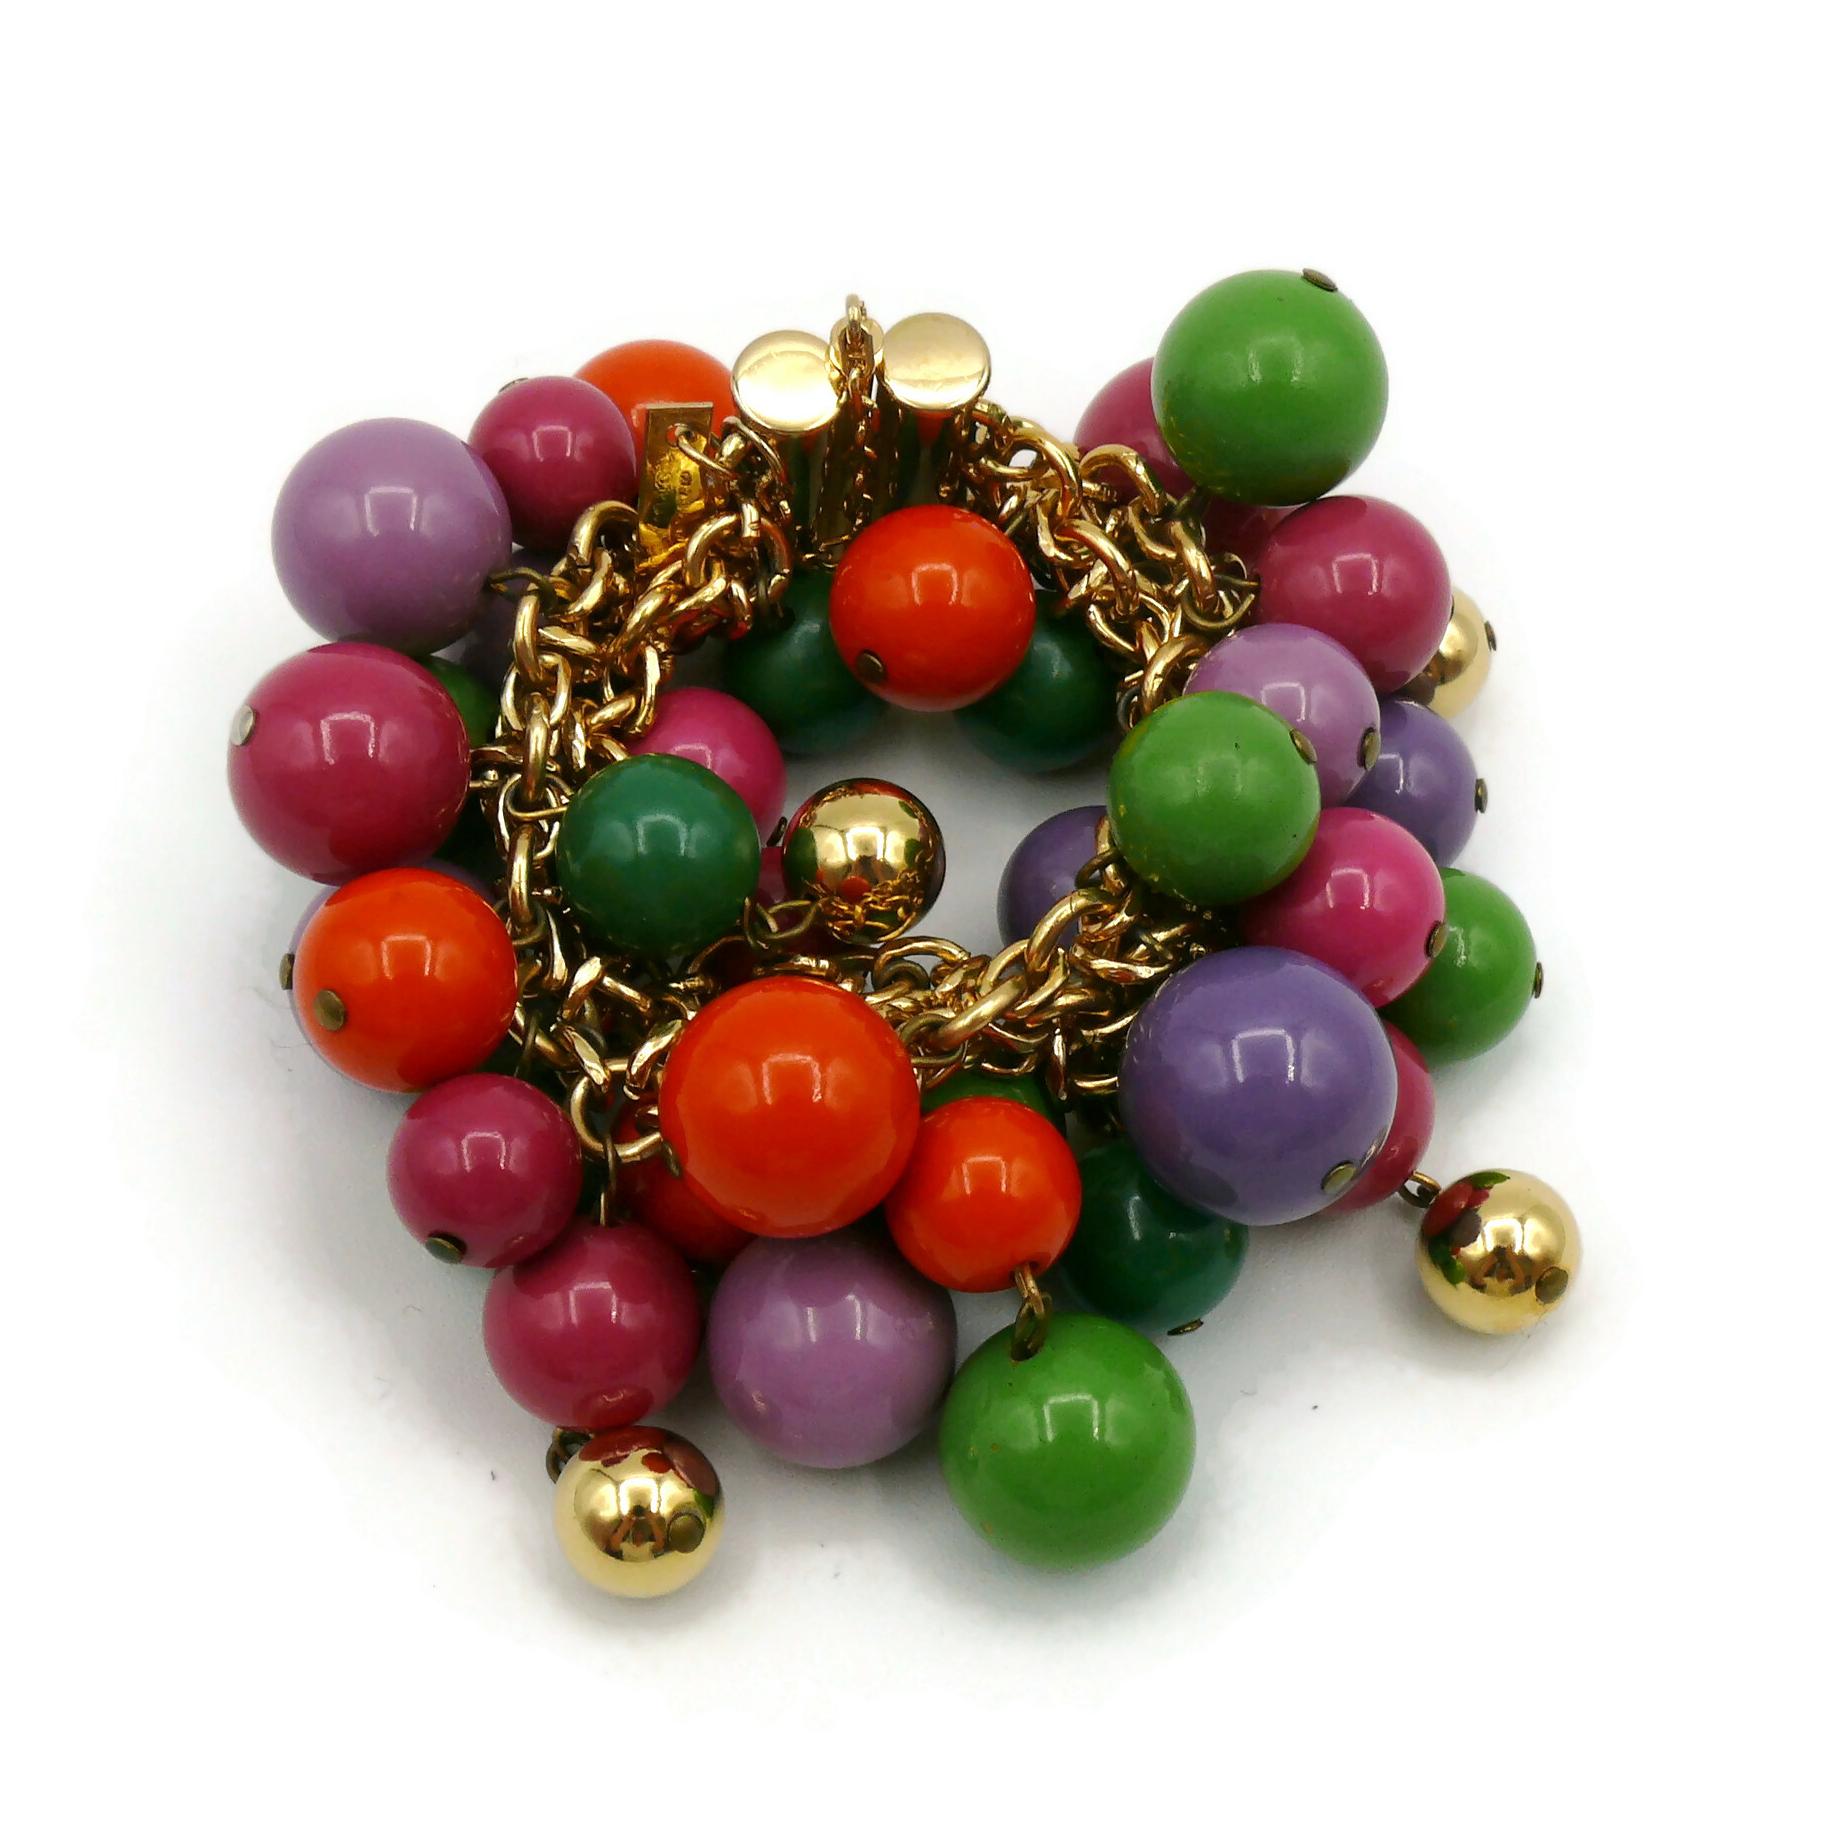 GIANNI VERSACE Vintage Multicolour Resin Bead Cluster Bracelet In Good Condition For Sale In Nice, FR